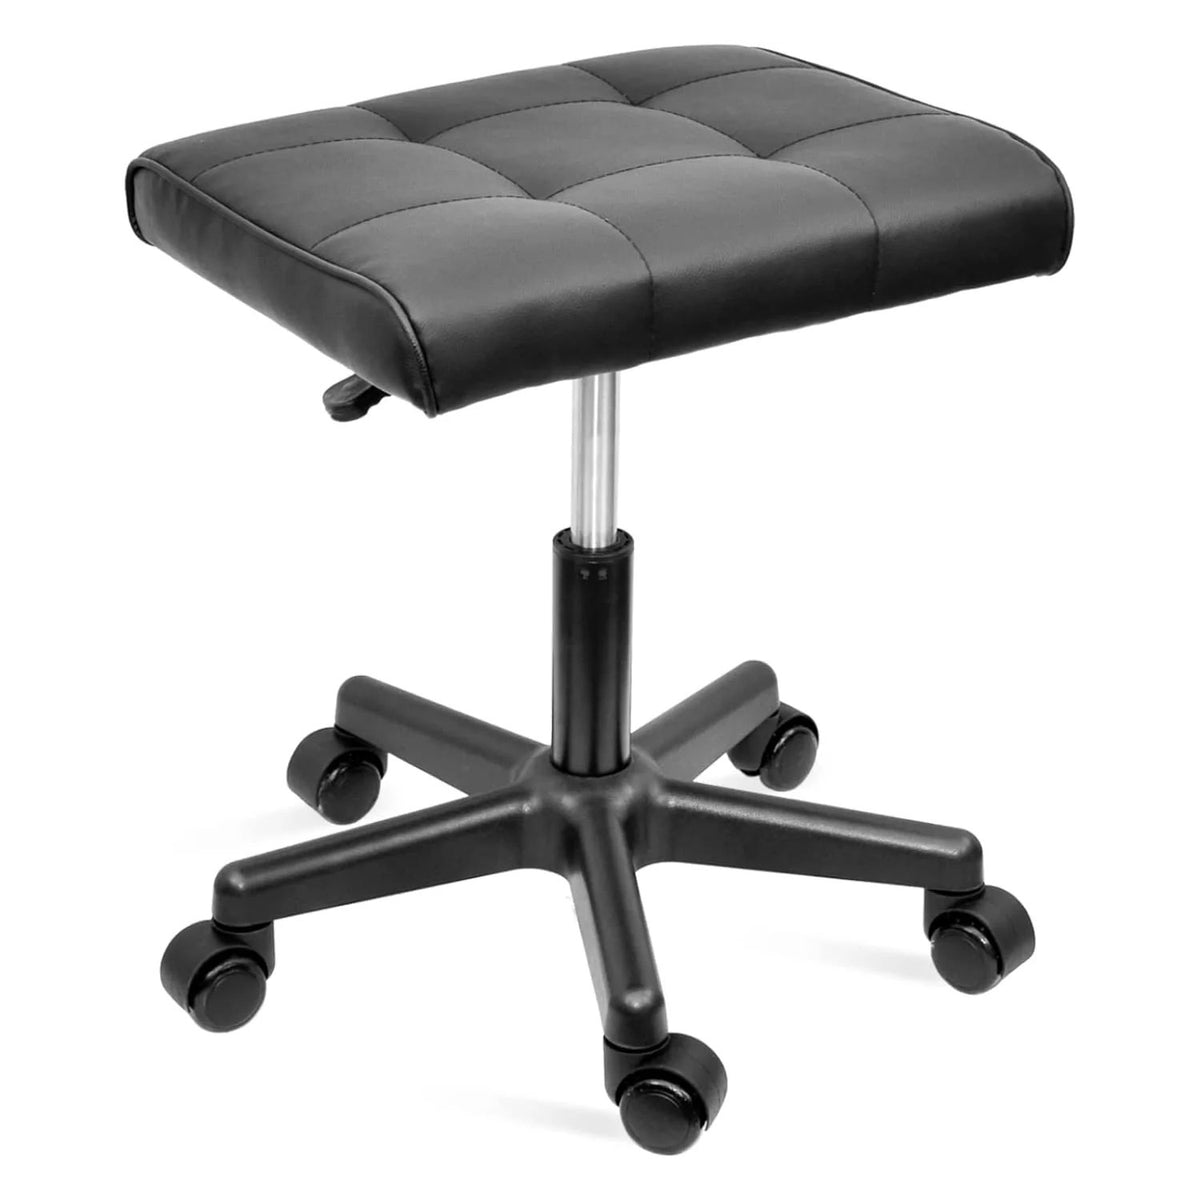 SmileSellers Hydraulic Adjustable Height Rolling Stool, Footstool with PU Leather, Footrest Ottoman Stool, Foot Rest for Office, Spa Facial Massage Tattoo Stool, (Black)